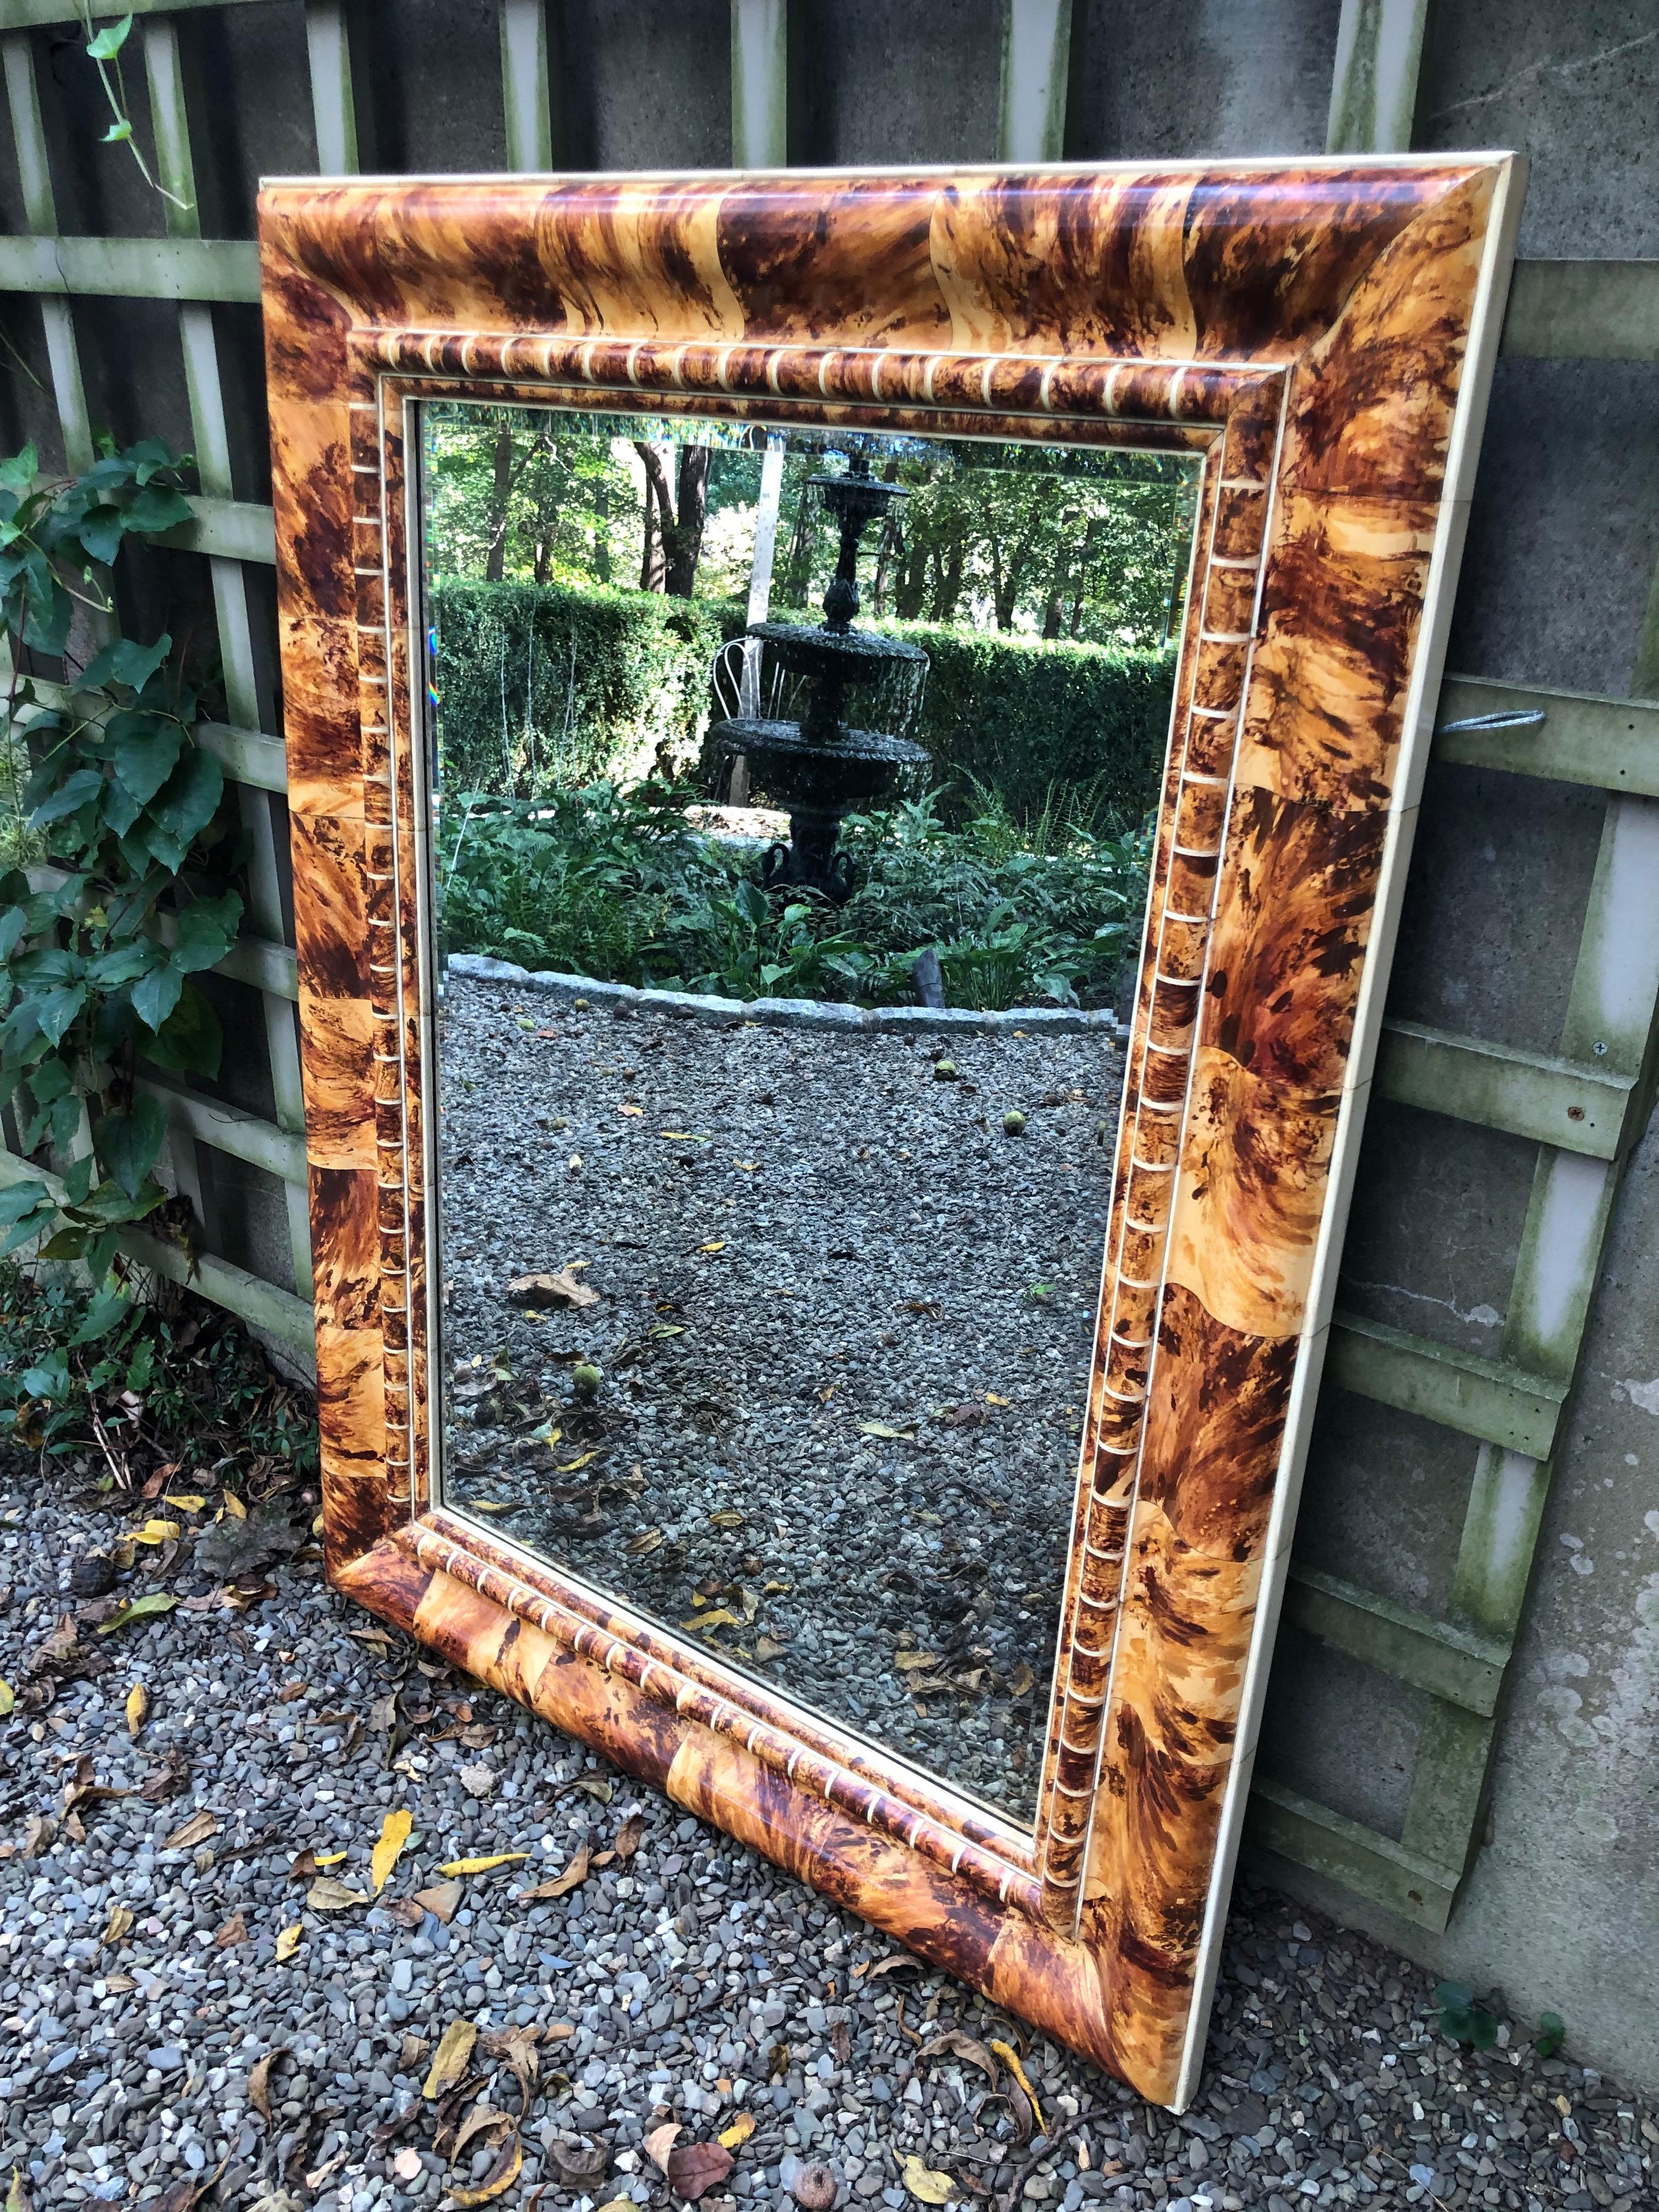 Outstanding custom mirror in faux tortoise shell painted by the renowned Isabel O’Neil Studio, New York City. Painting is extremely realistic with varying shades of brown and ivory. Lacquered finish. Mirror is aged glass and is beveled.
 